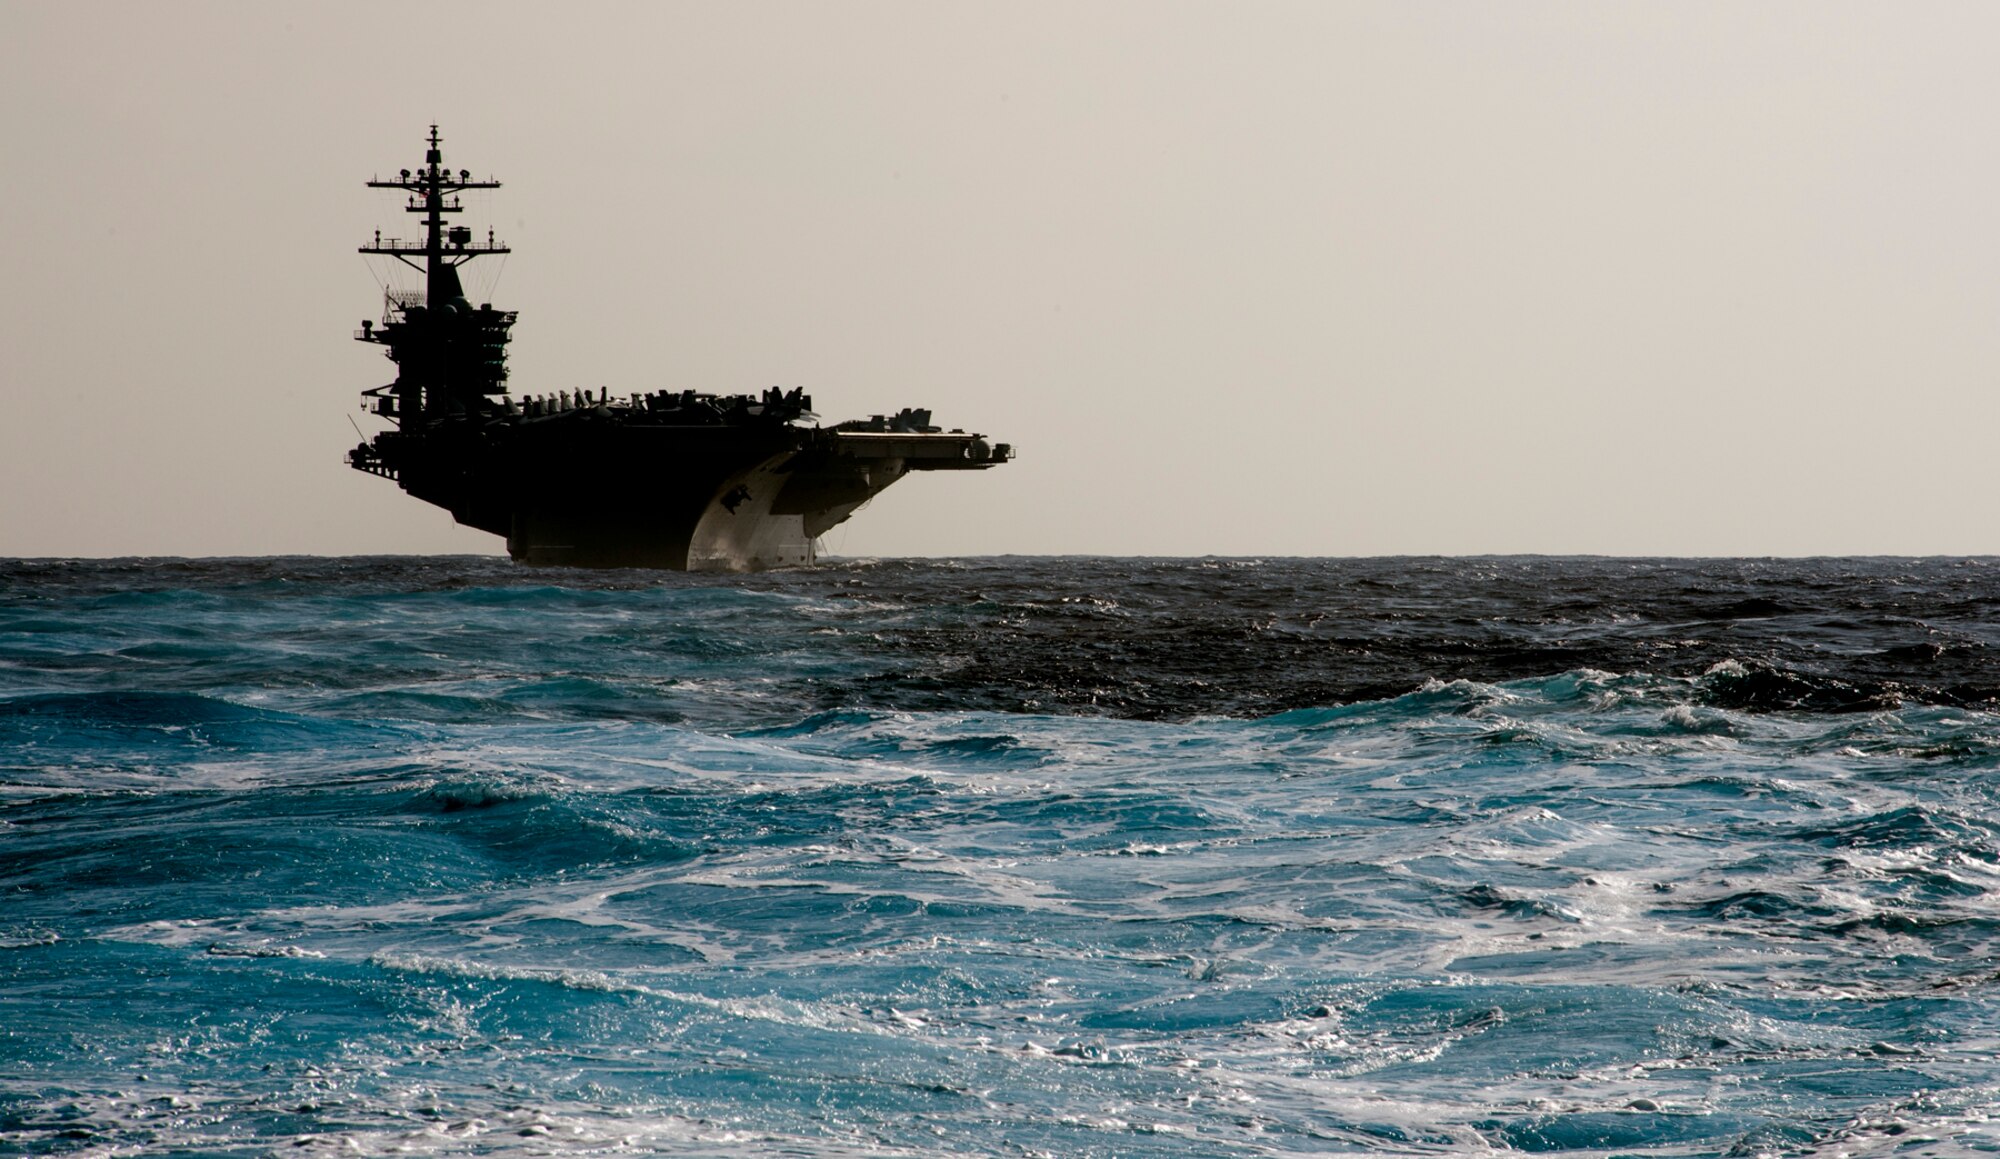 PACIFIC OCEAN (Jan. 18, 2017) Nimitz-class aircraft carrier USS Carl Vinson (CVN 70) transits the Pacific Ocean. Carl Vinson is on a regularly scheduled Western Pacific deployment with the Carl Vinson Carrier Strike Group as part of the U.S. Pacific Fleet-led initiative to extend the command and control functions of the U.S. 3rd Fleet in the Indo-Asia-Pacific region. (U.S. Navy photo by Petty Officer 2nd Class Nathan K. Serpico)